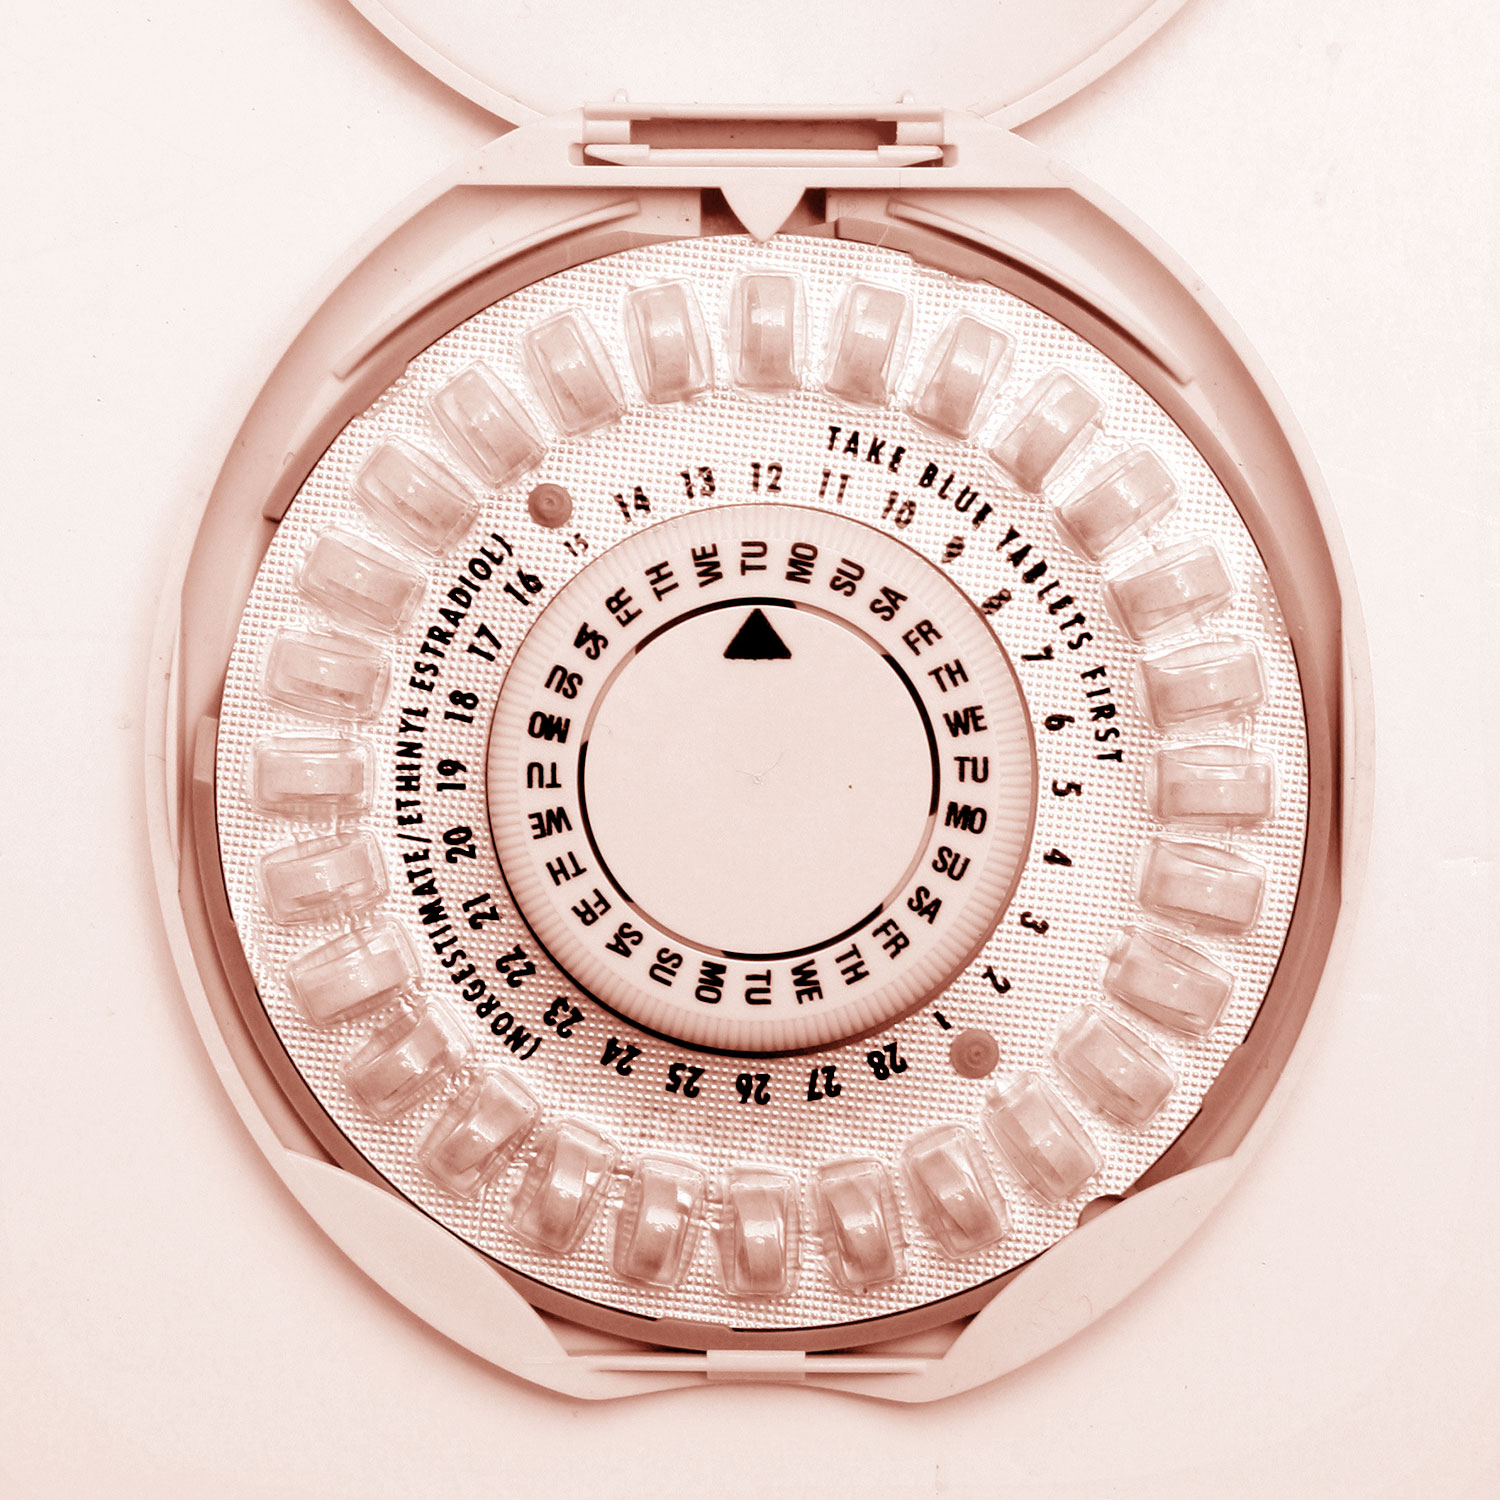 The dark history of the pill